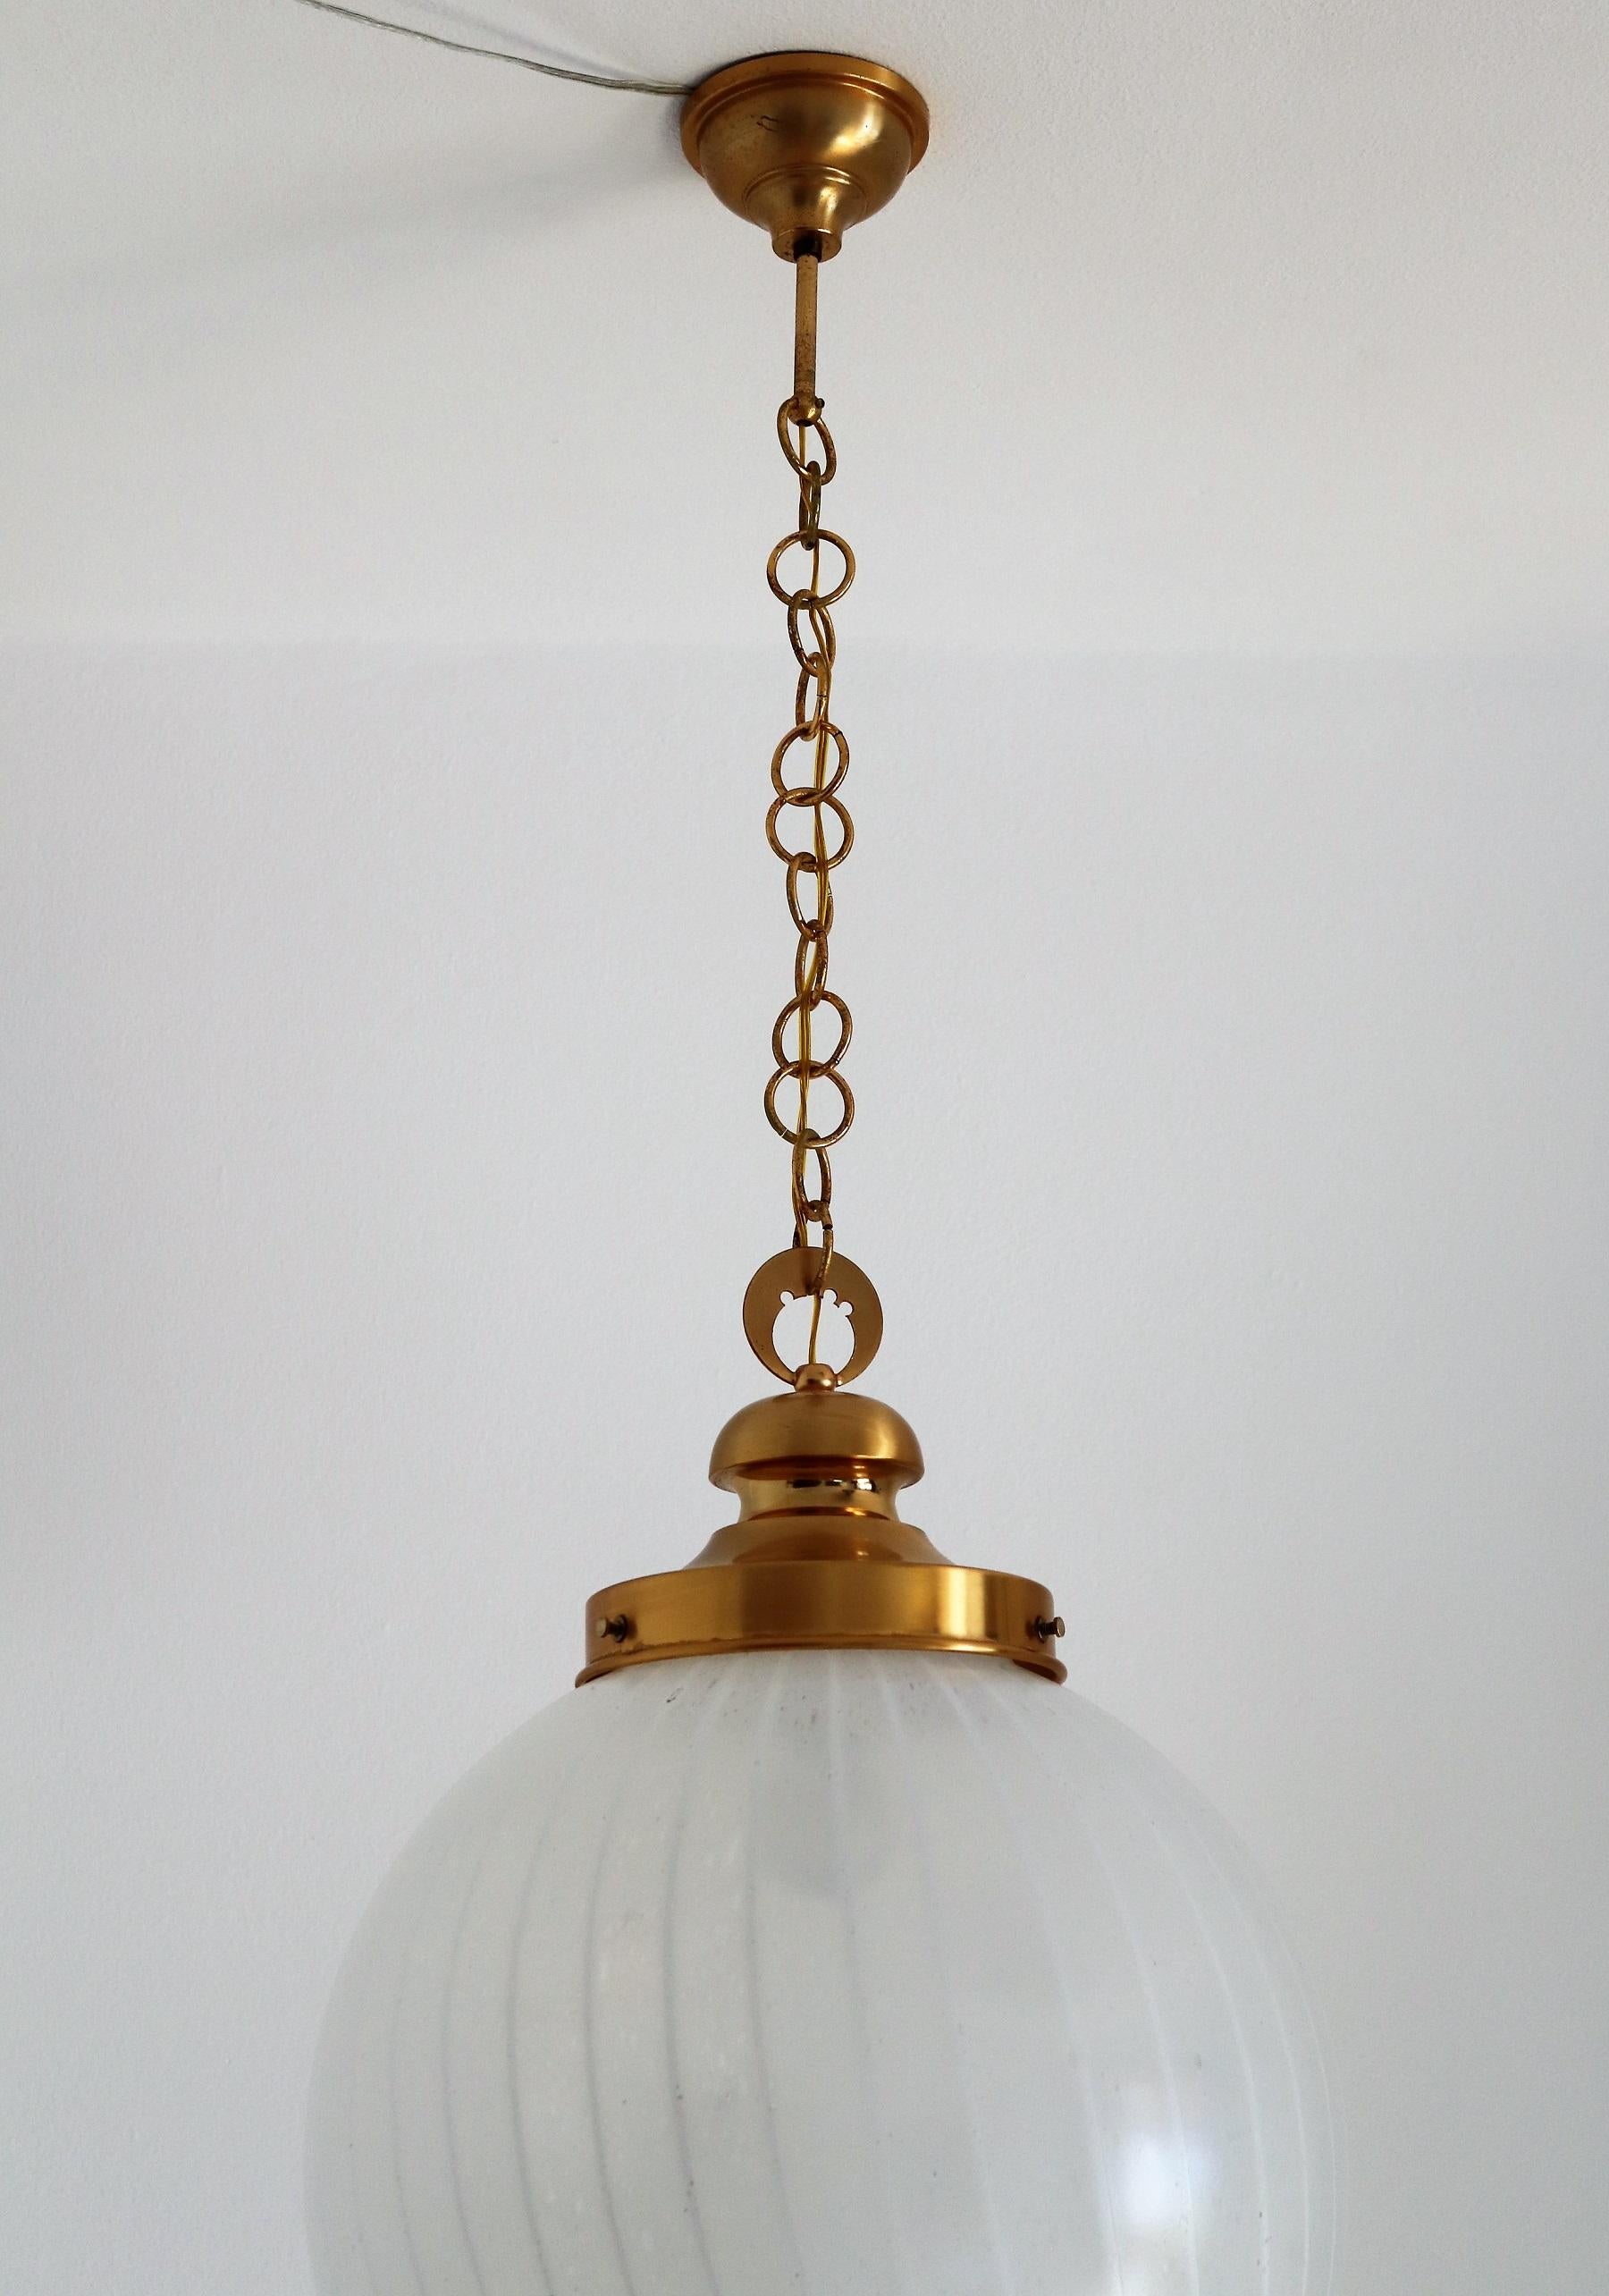 Italian Midcentury Murano Glass Globe Pendant Chandelier with Brass Details, 60s For Sale 2